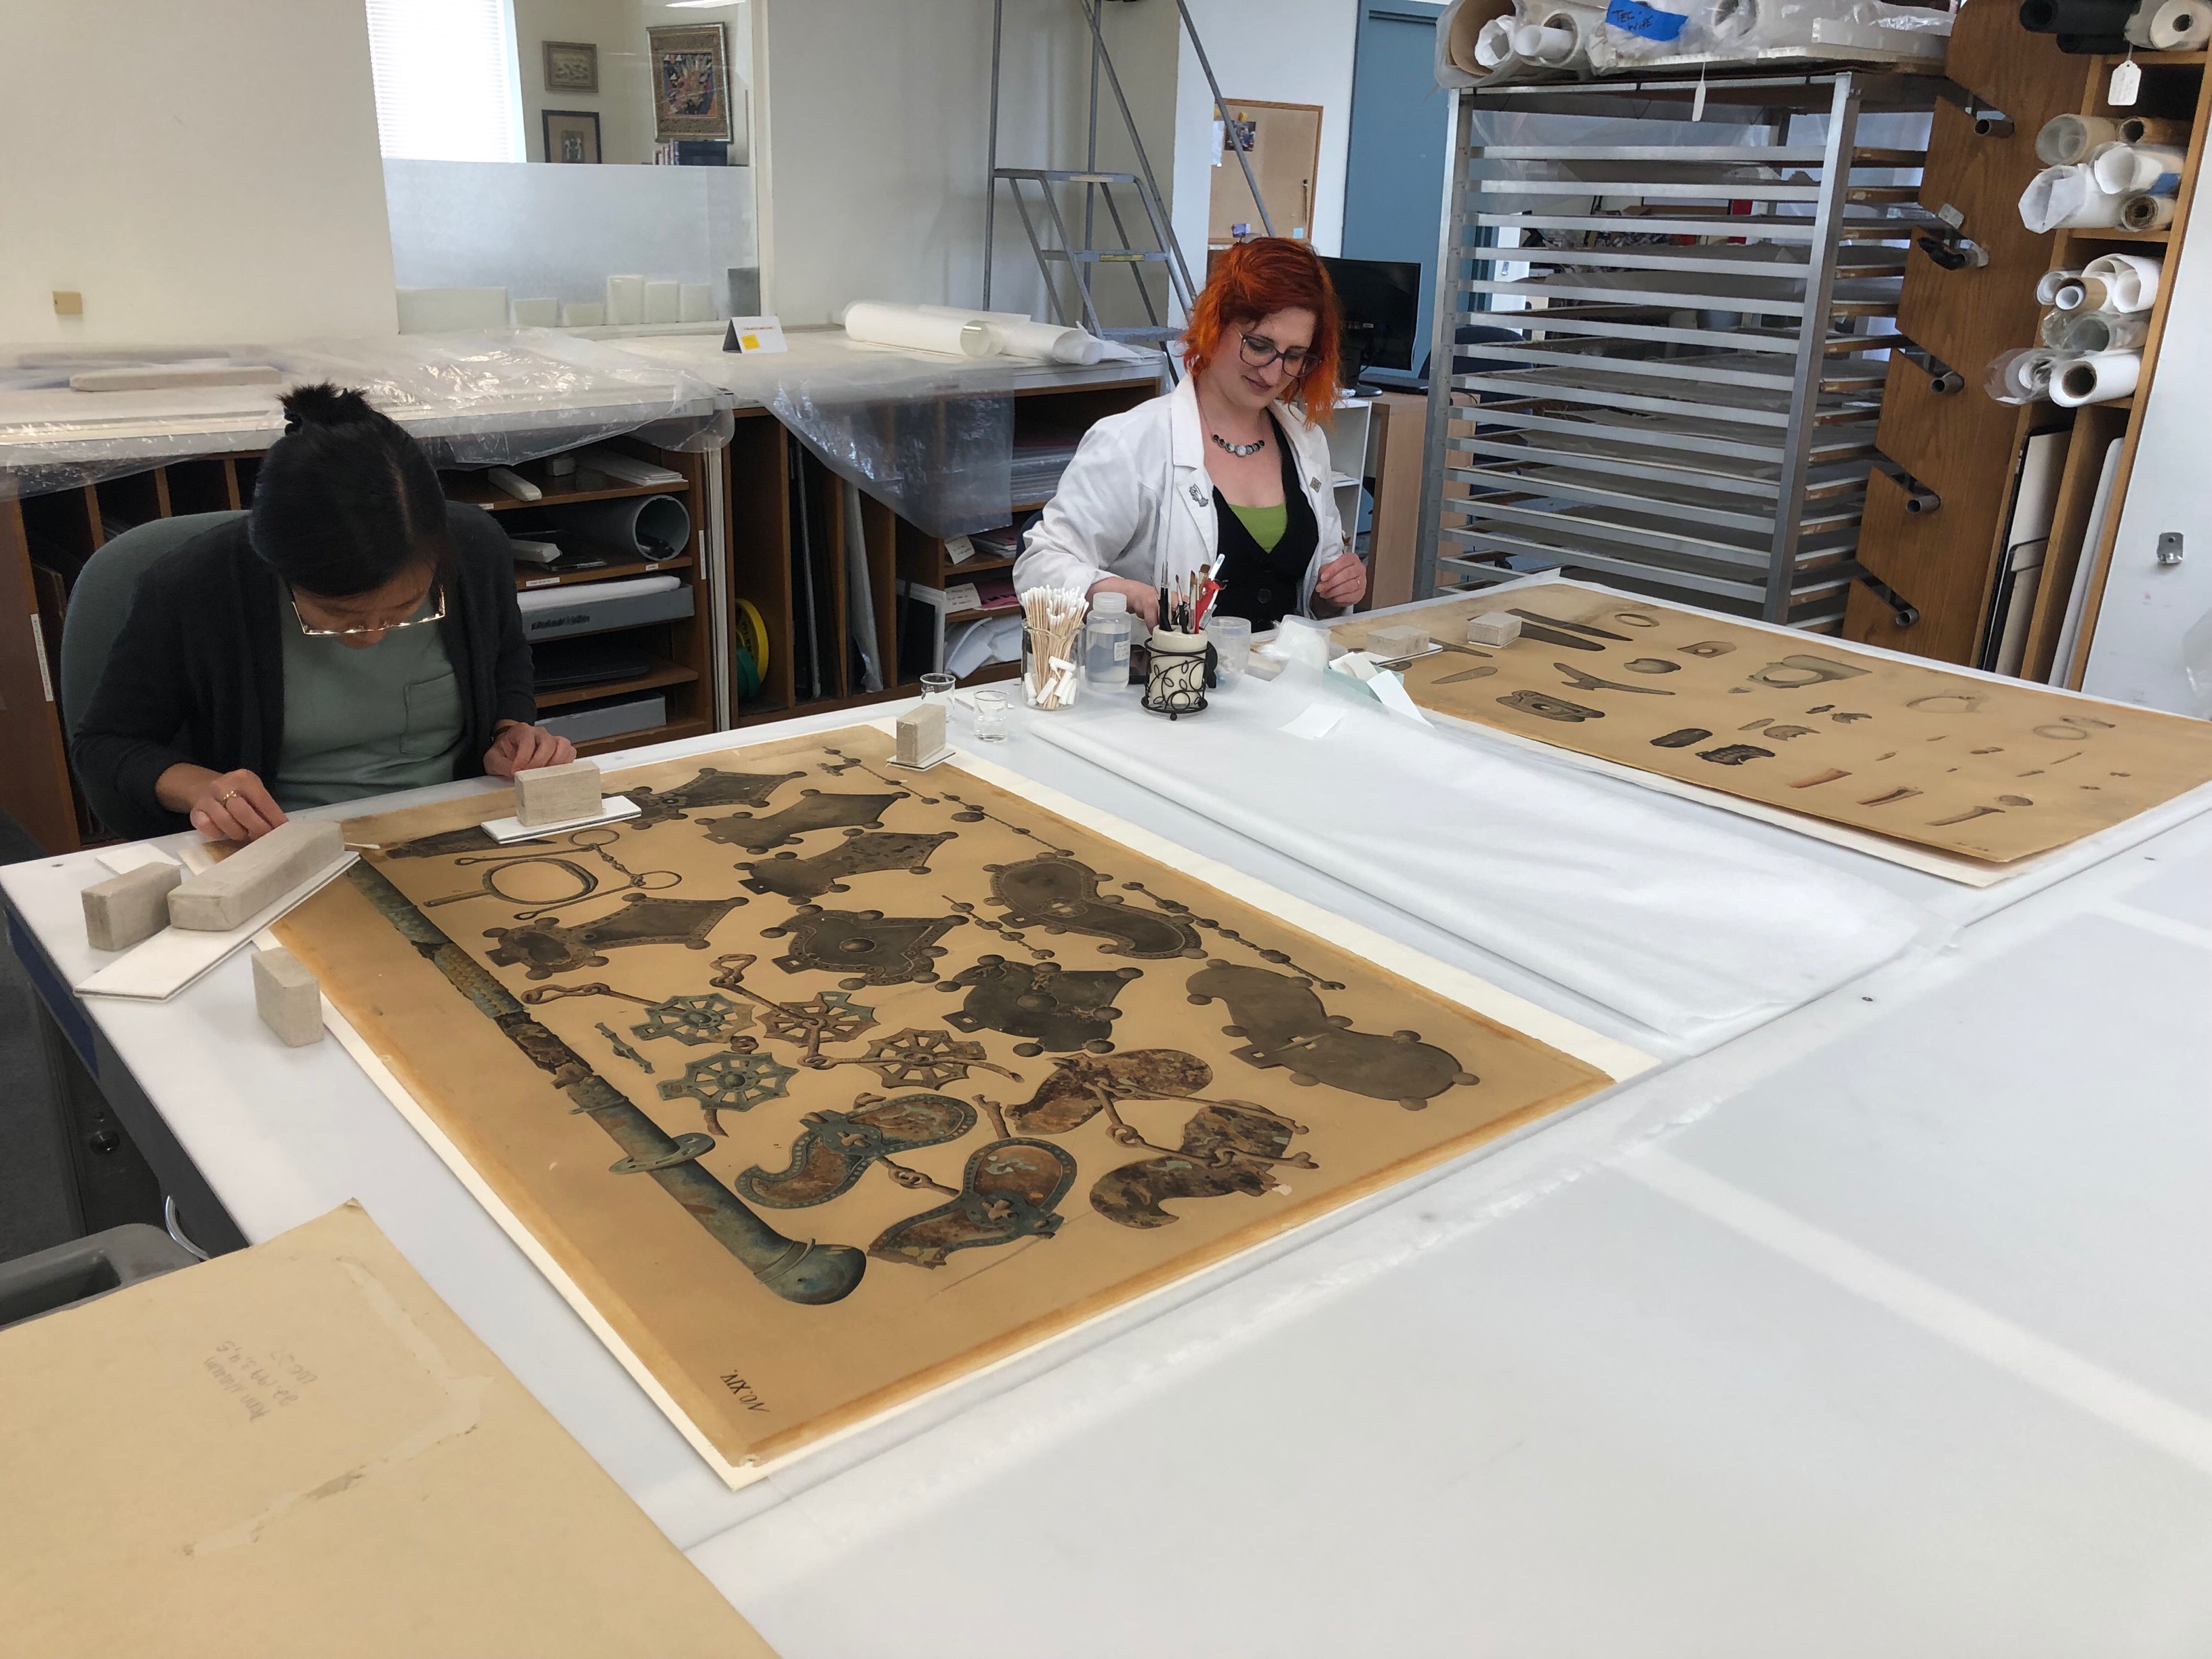 CCAHA Conservation Technician Binh-An Nguyen and Associate Conservator Joanna Hurd work together on an 1893 Japanese watercolor from the Penn Museum's collections